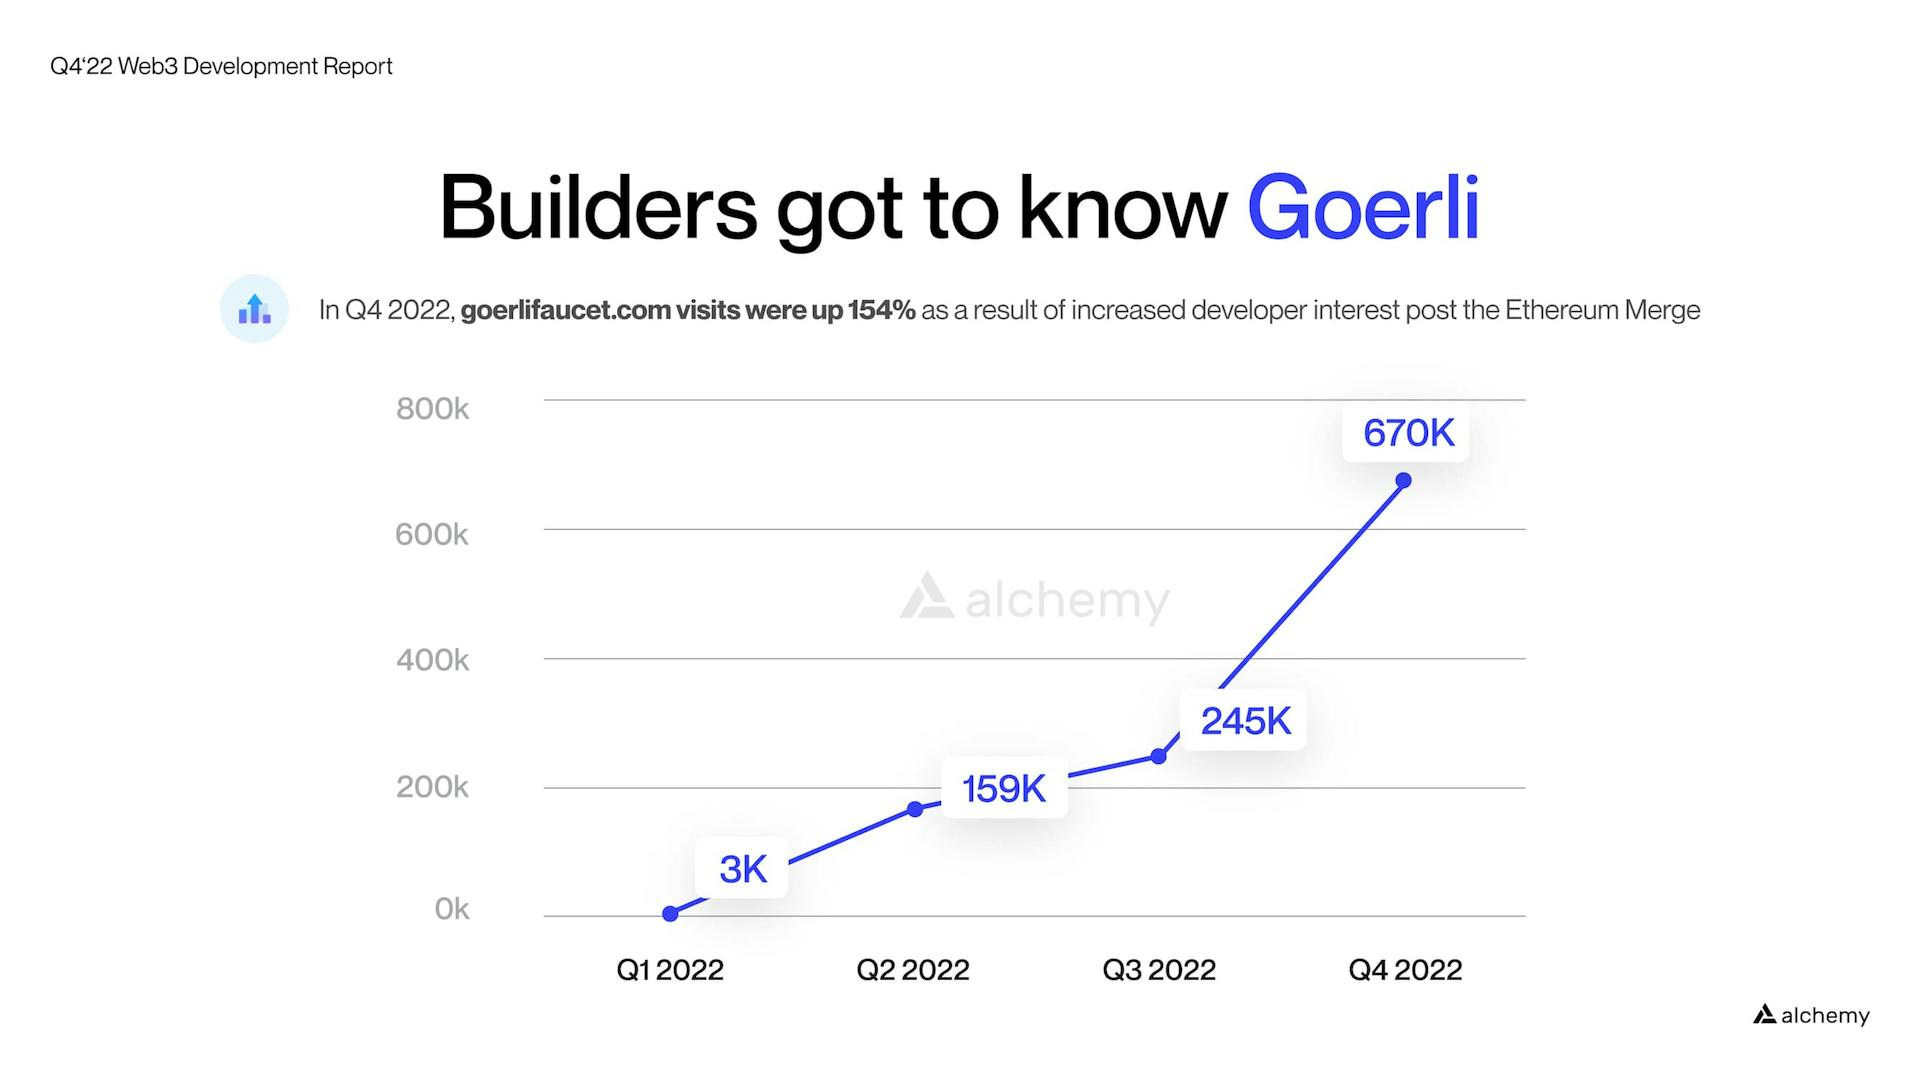 Alchemy's Goerli faucet saw record numbers of unique visitors during Q4 2022.